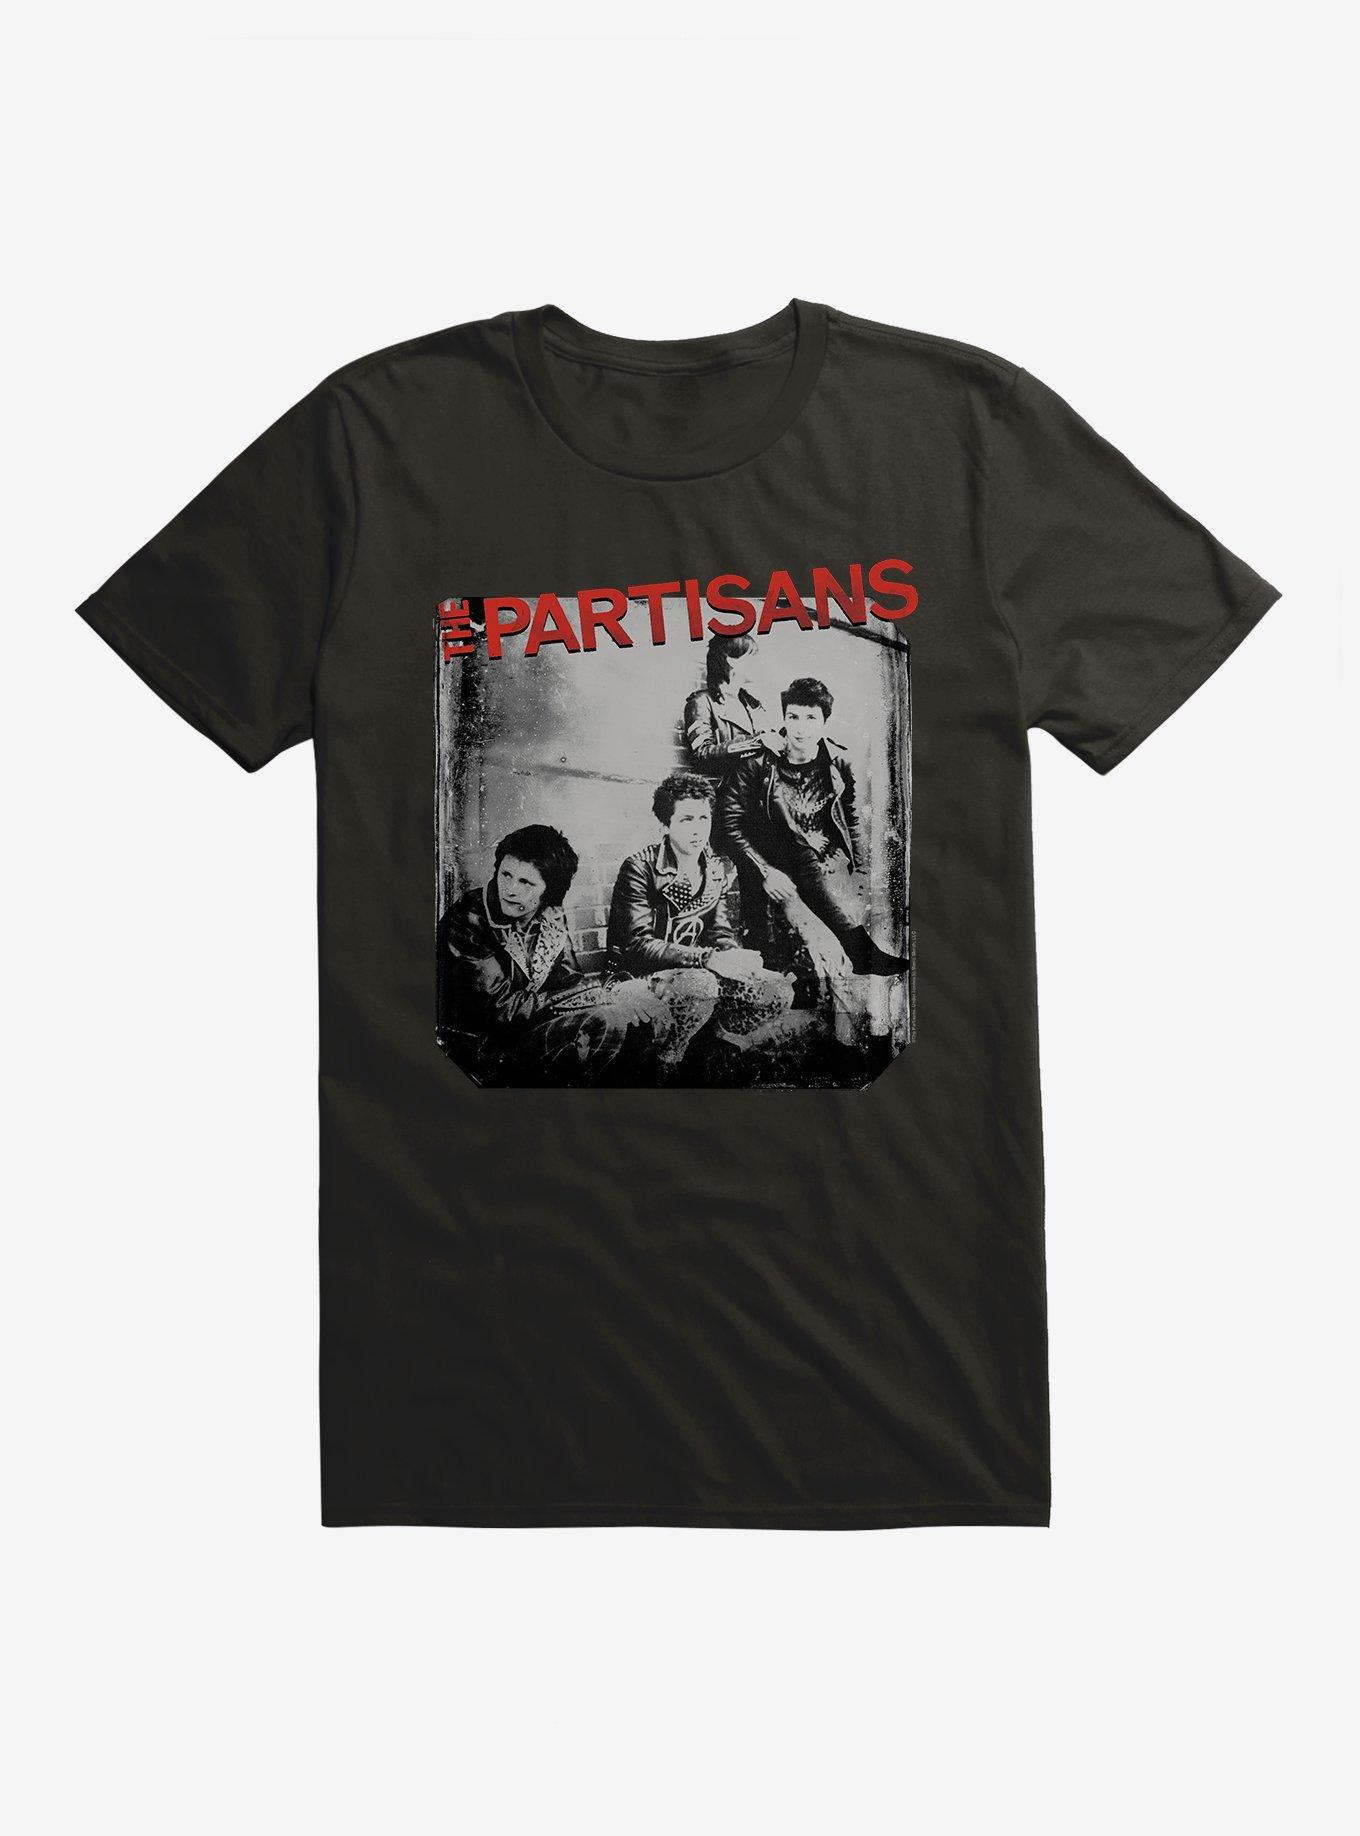 The Partisans Police Story T-Shirt